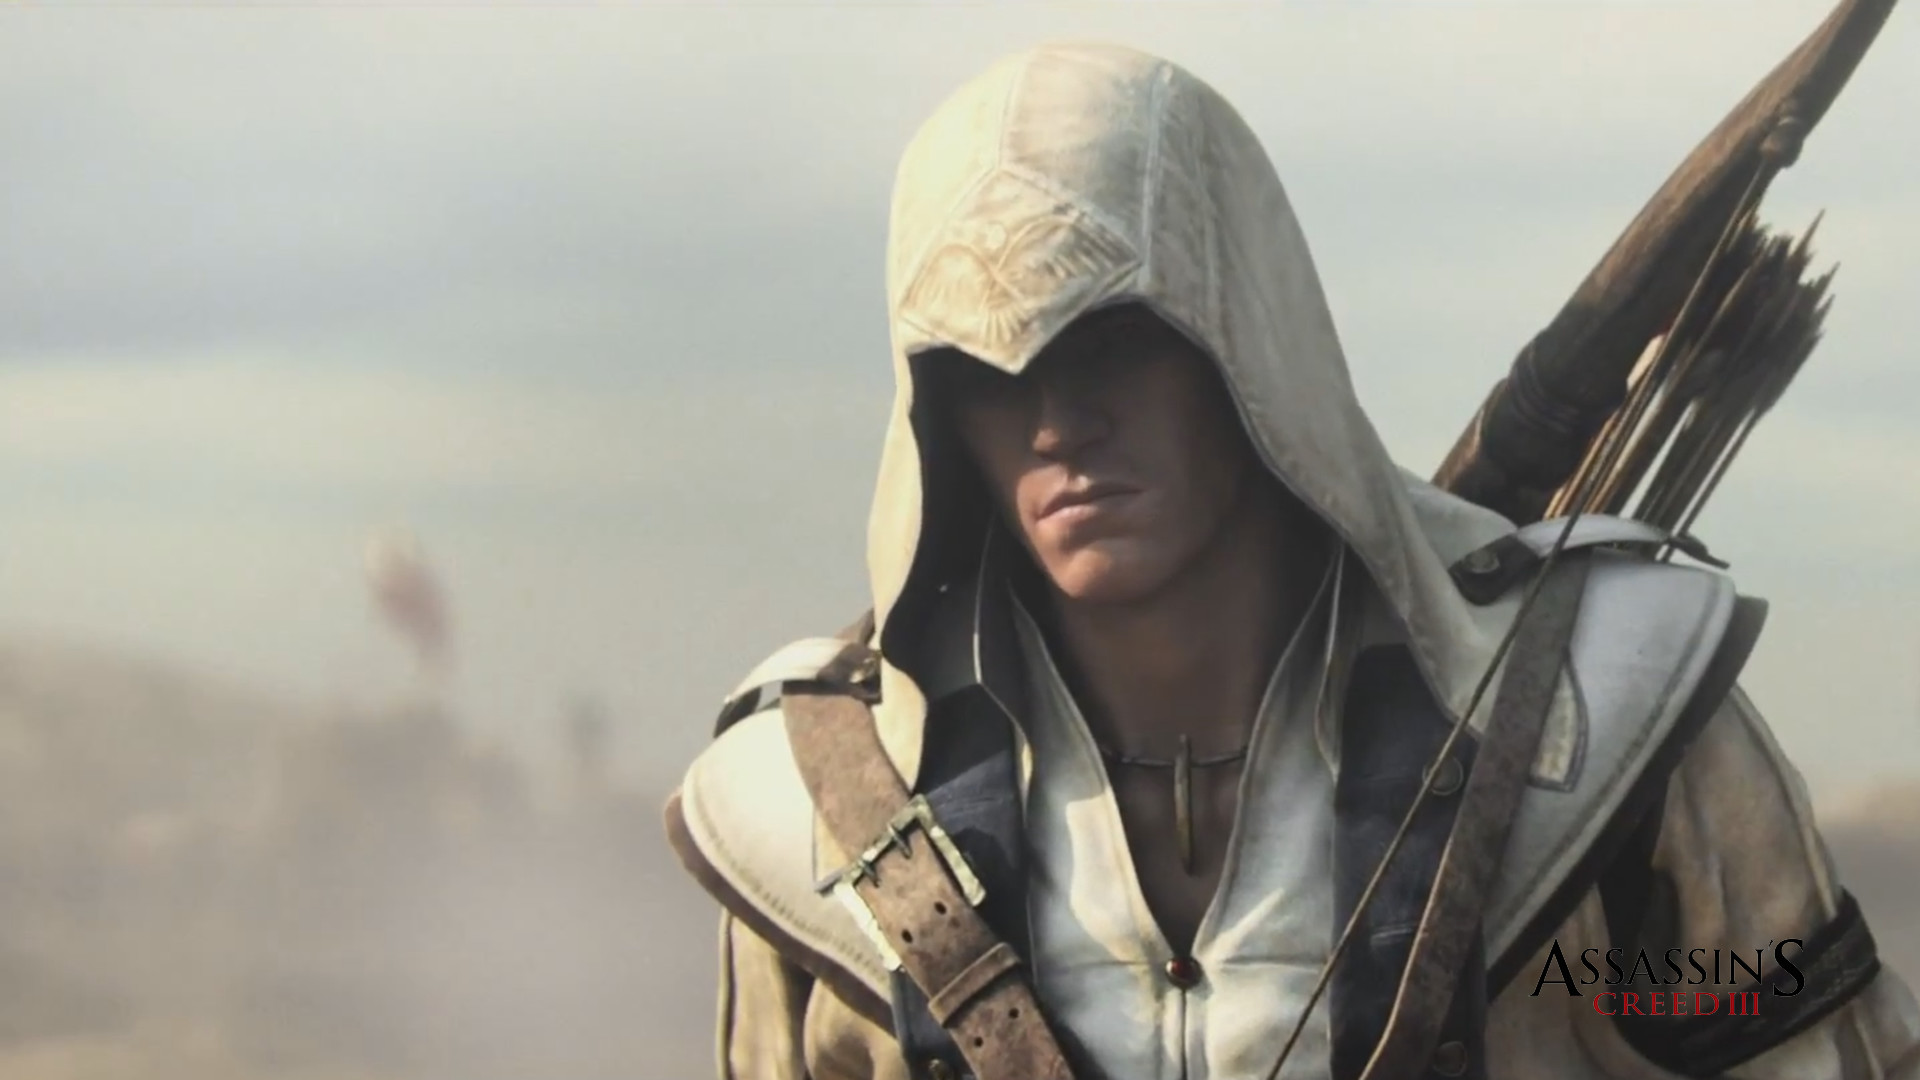 1920x1080 Assassins-Creed-3-Wallpaper-yuiphone-Connor-Waiting